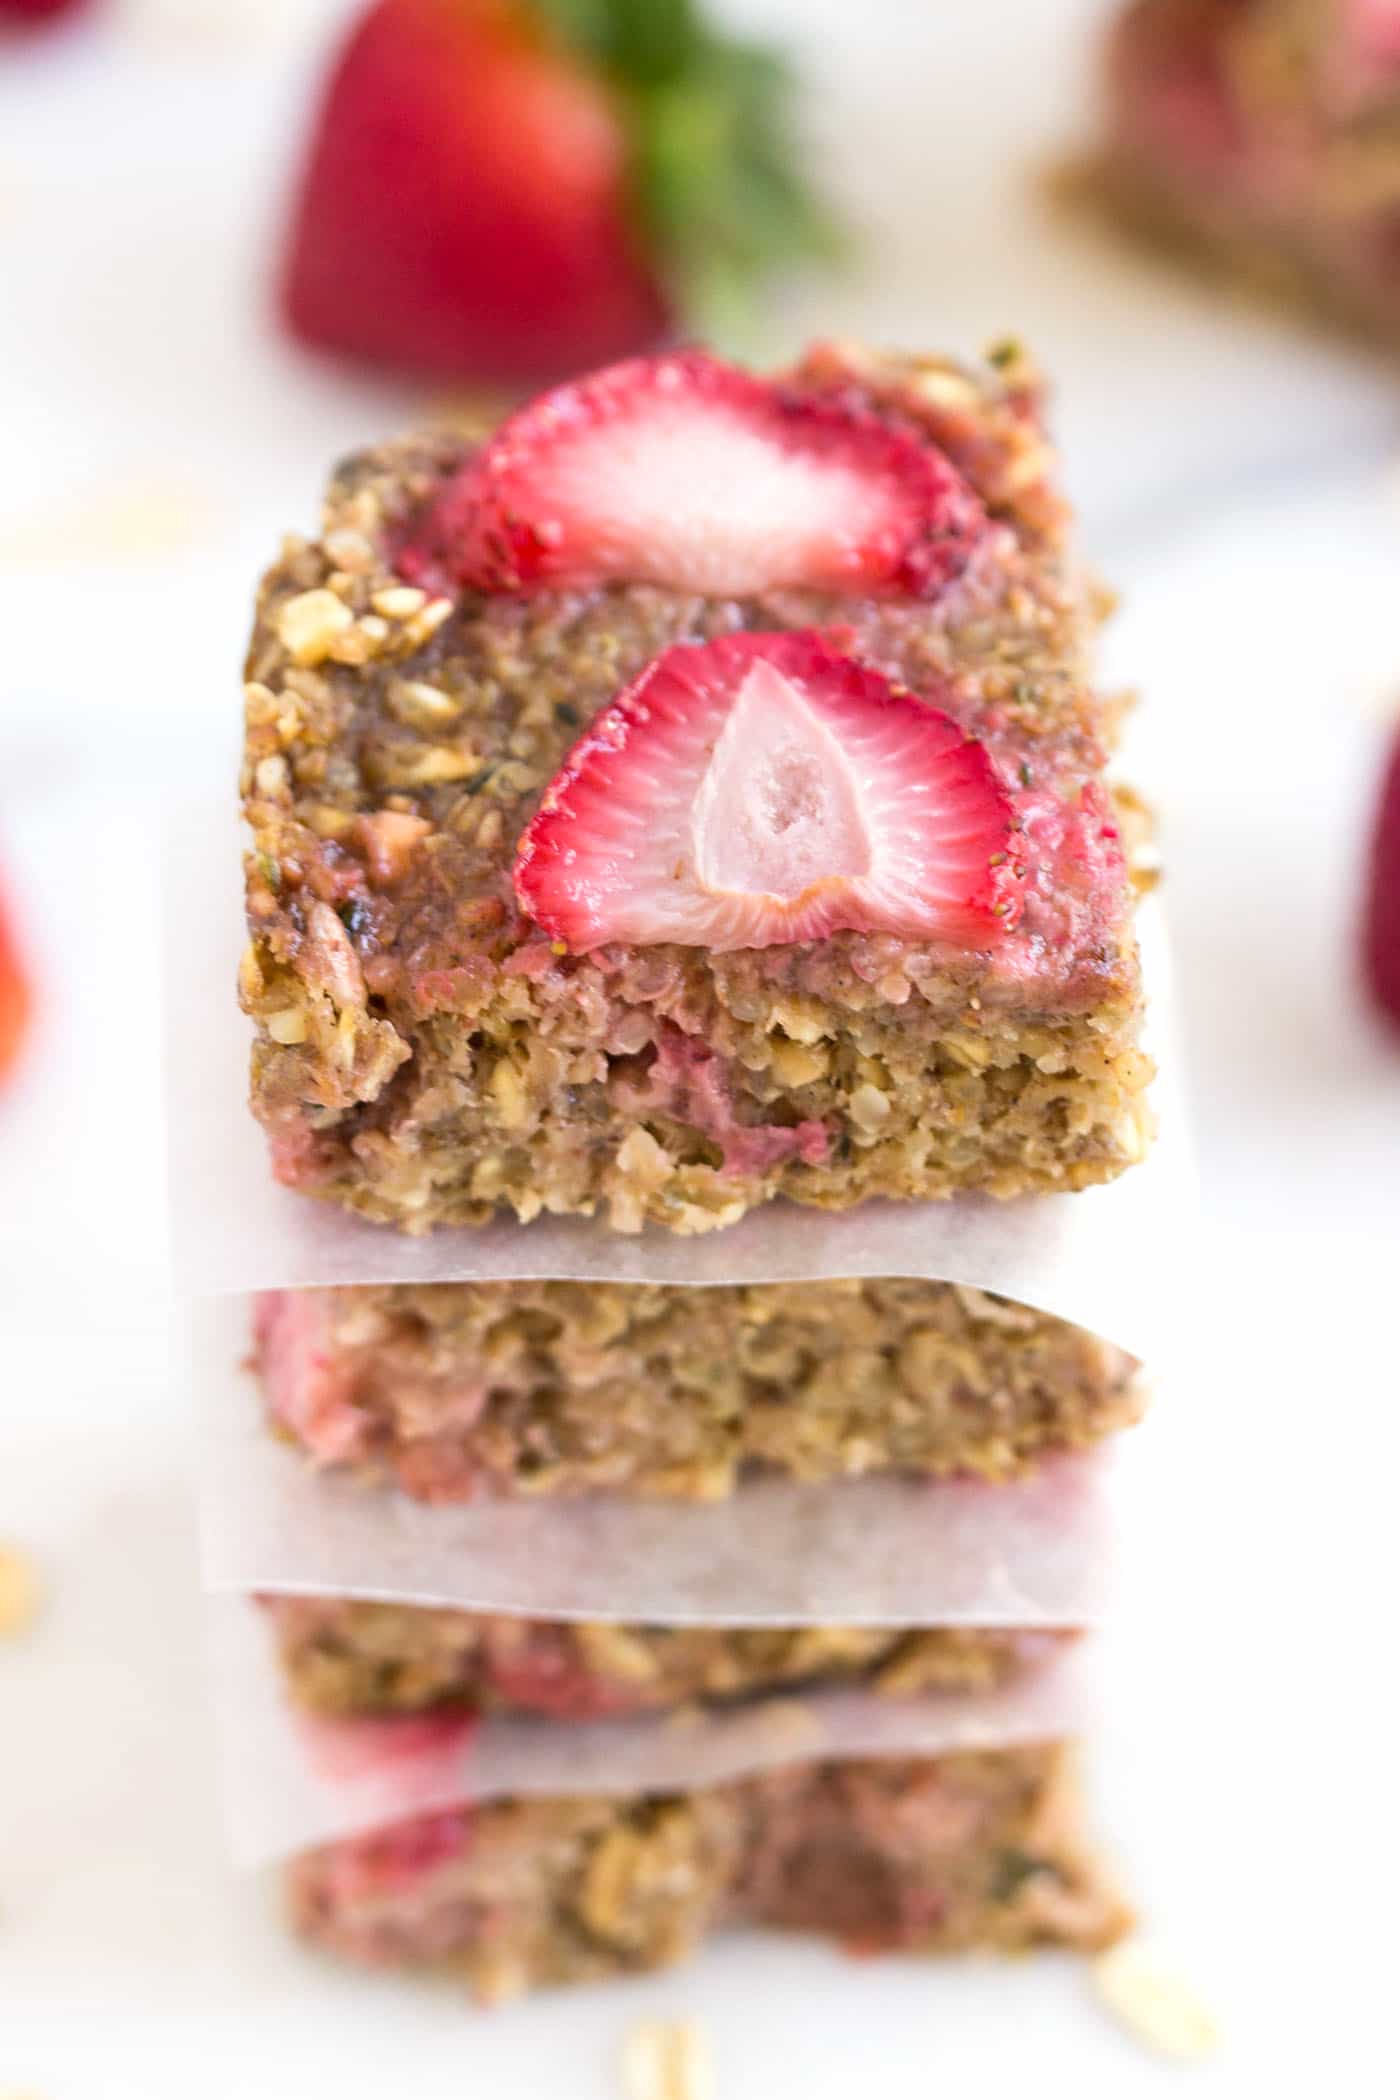 These strawberry quinoa breakfast bars are FLOURLESS, packed with protein and fiber, and are the perfect portable breakfast!